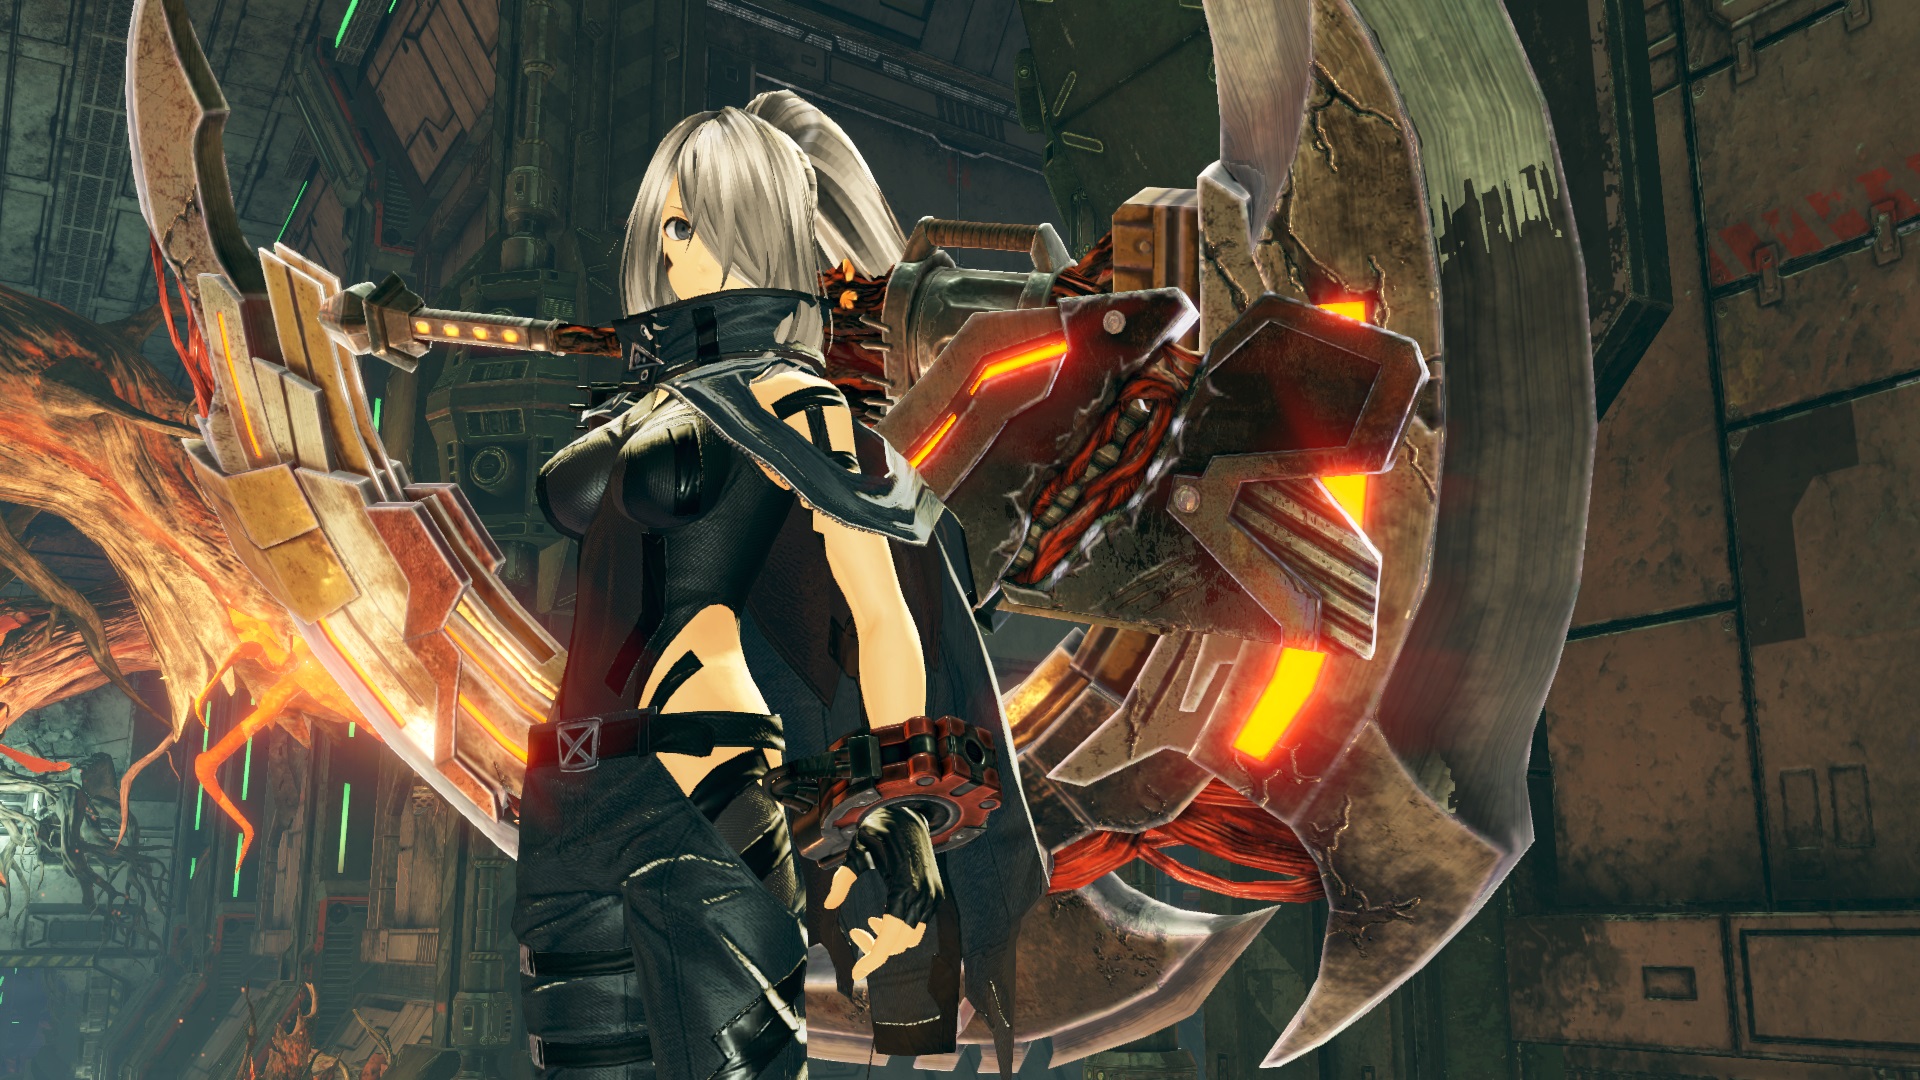 God Eater 3 release of the week